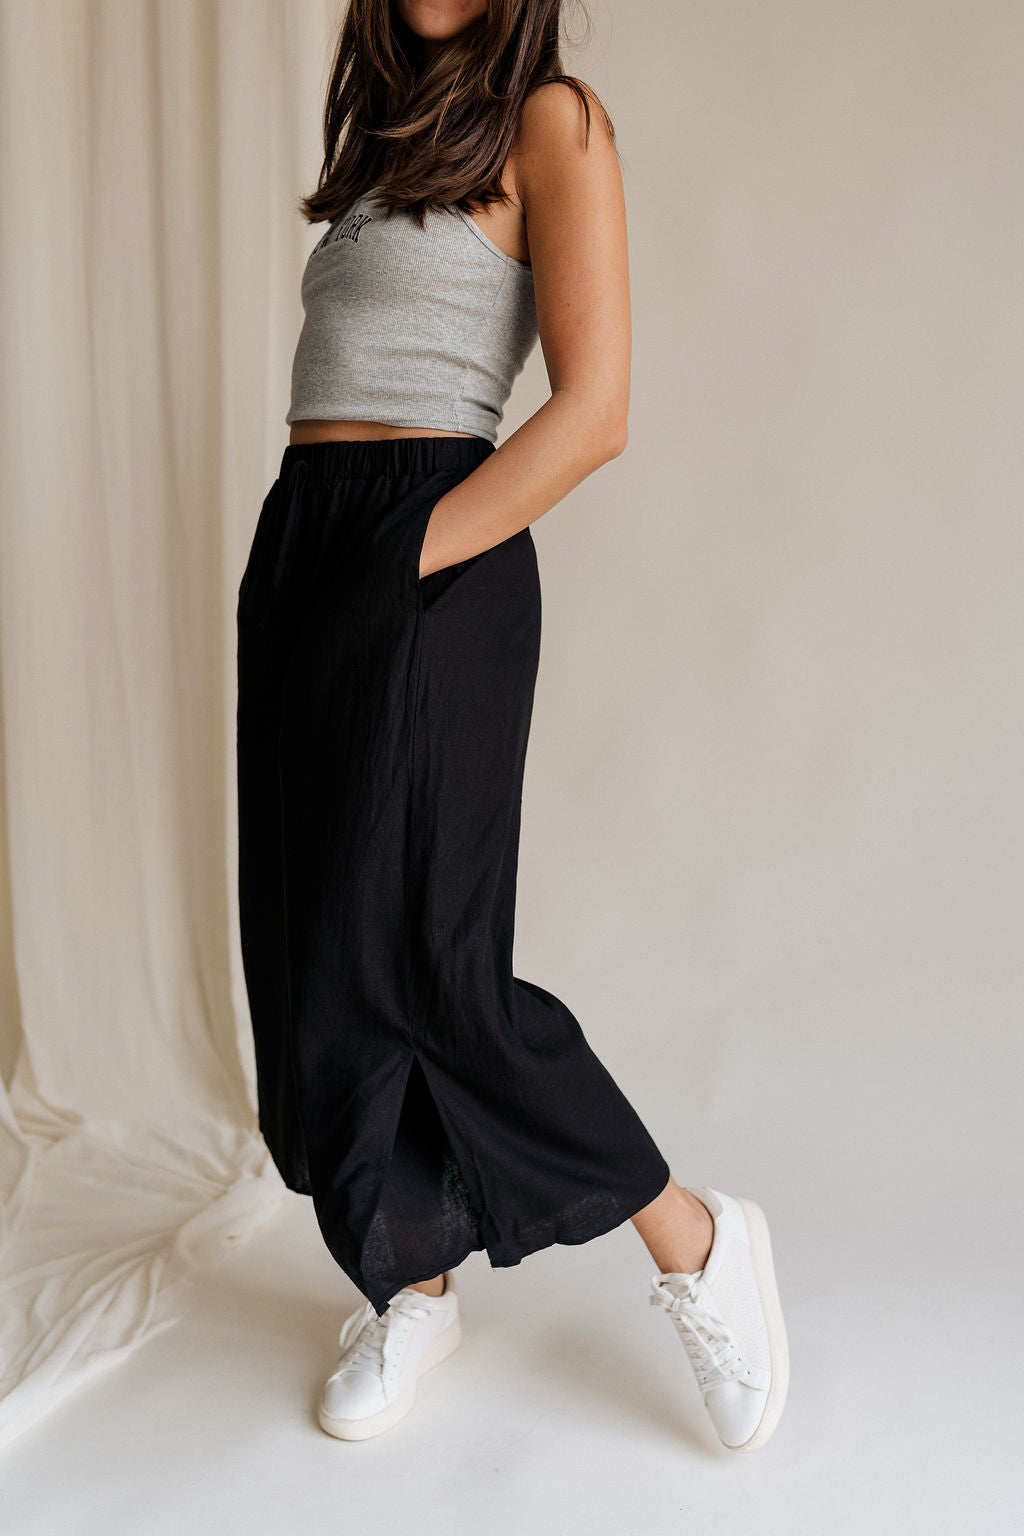 Frontal side view of female model wearing the Meredith Black Cropped Wide Leg Pants that have black fabric, cropped wide legs, side slits, and a drawstring waist.